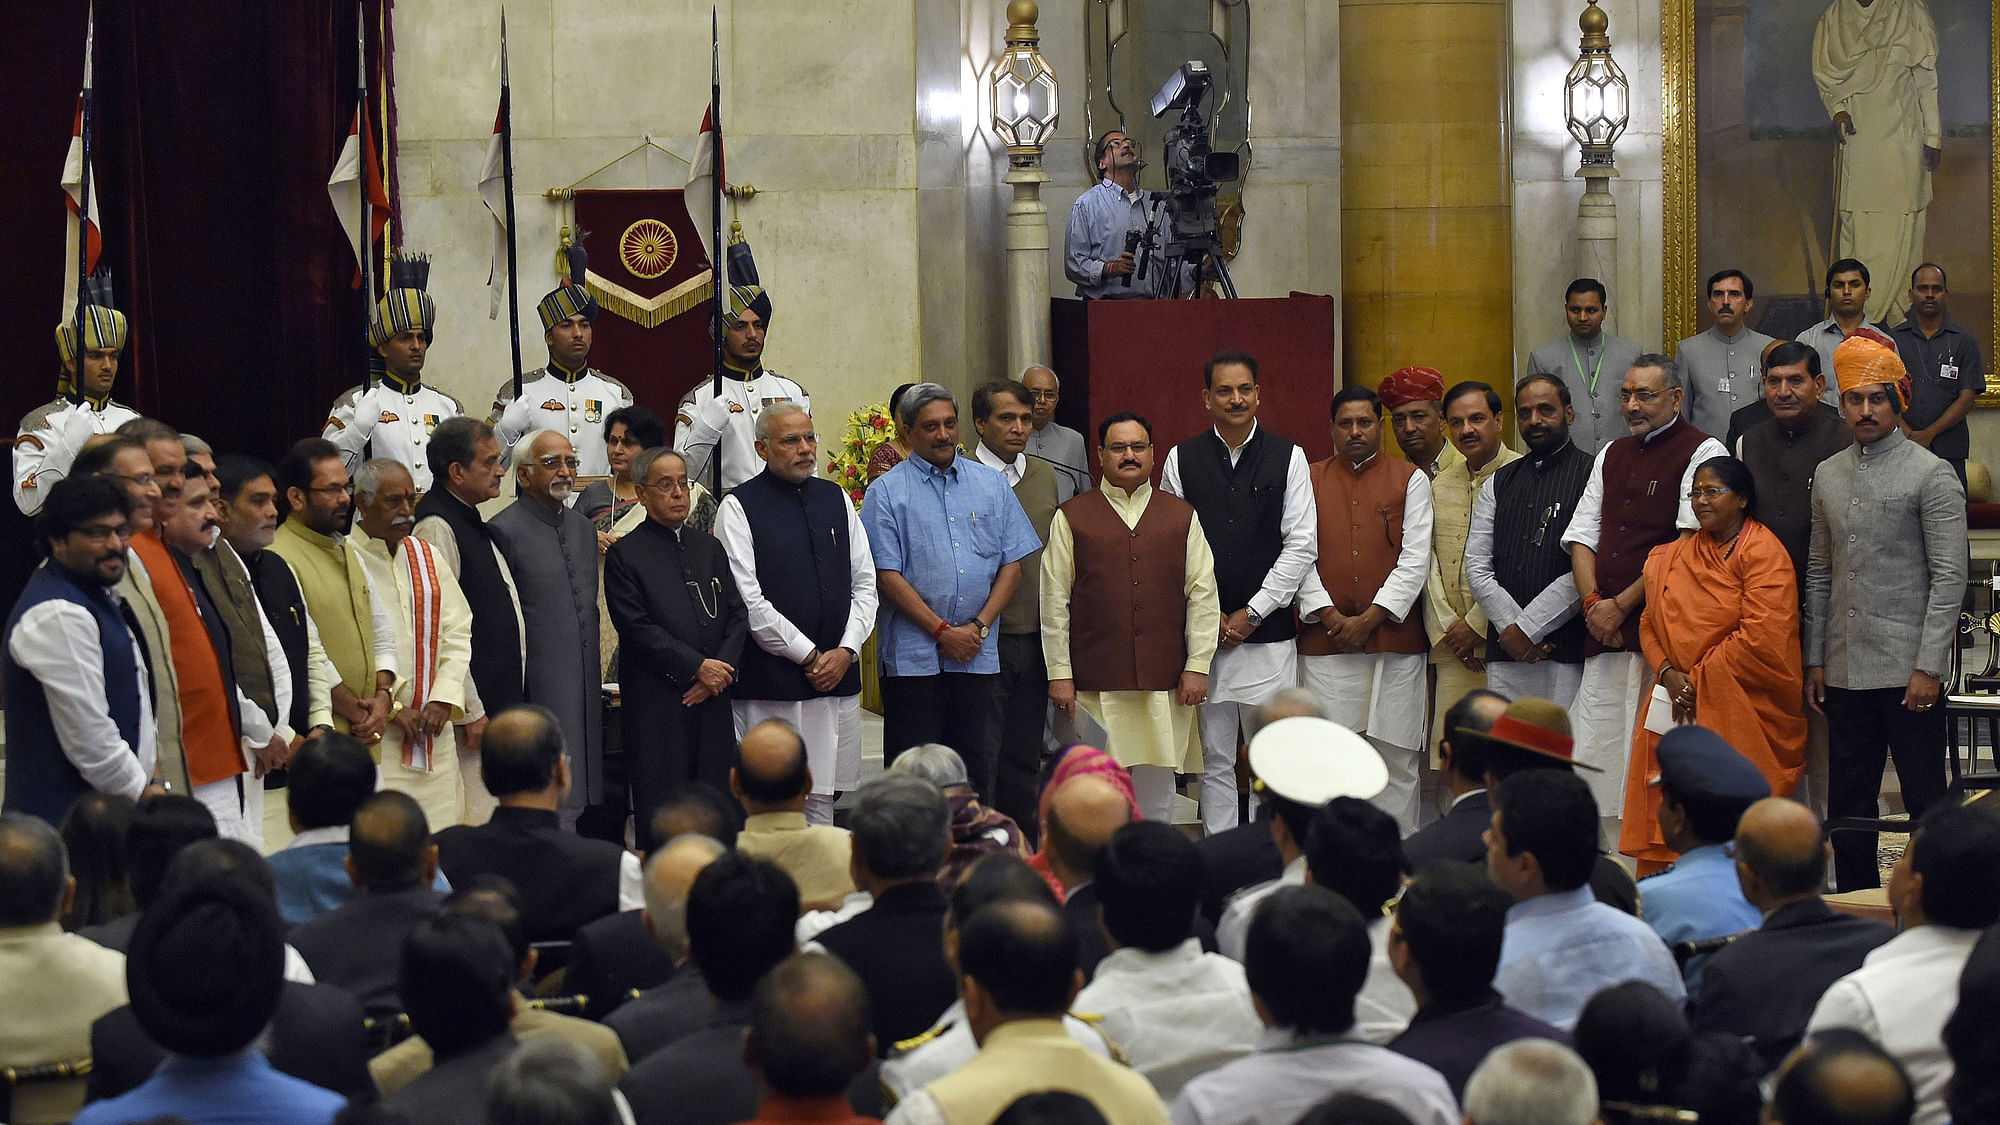 Prime Minister Narendra Modi poses with cabinet ministers after the swearing-in ceremony at the presidential palace in New Delhi, November, 2014. (Photo: Reuters)